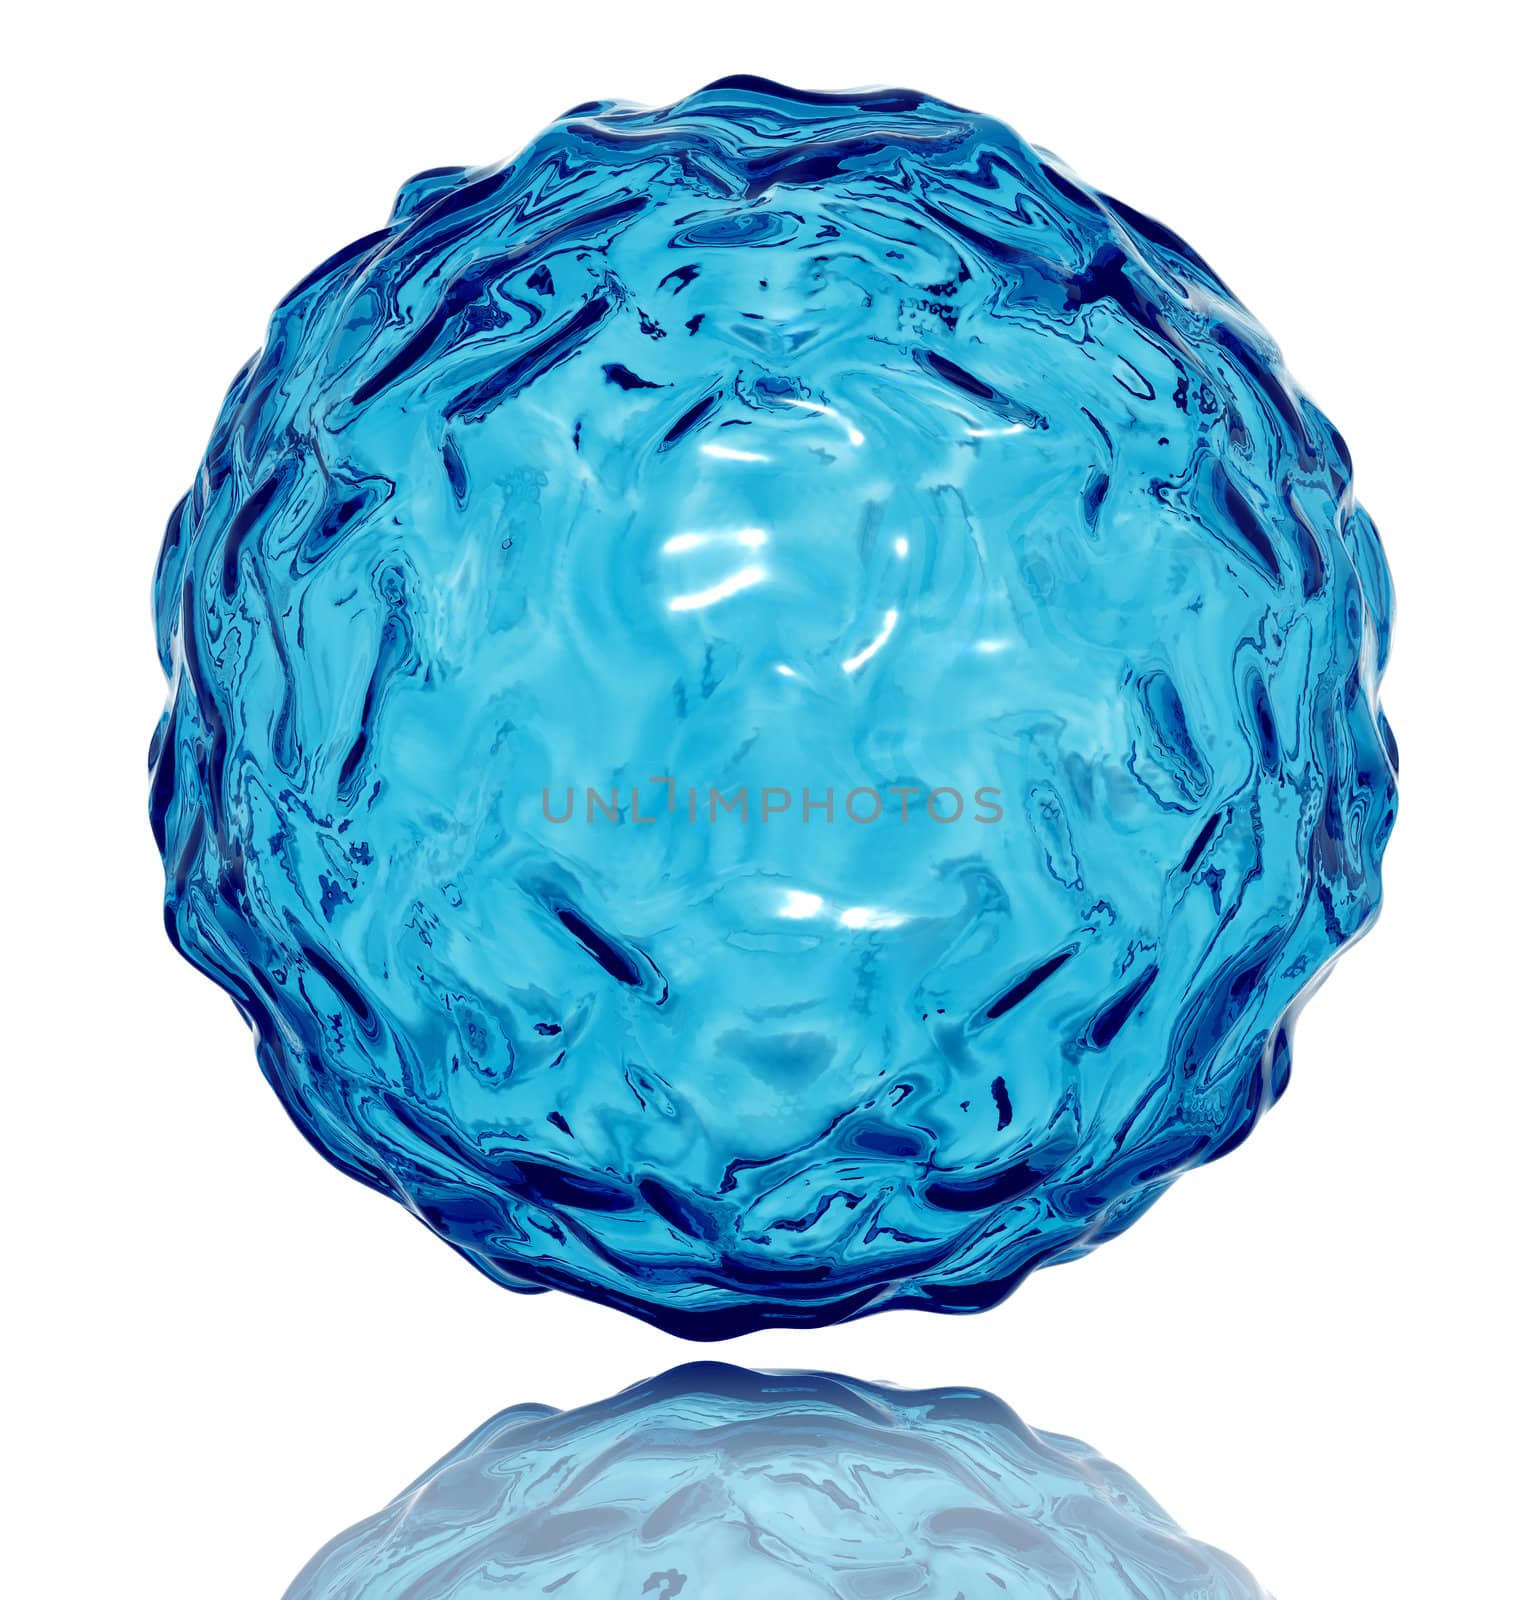 Water sphere with wavy surface. 3d